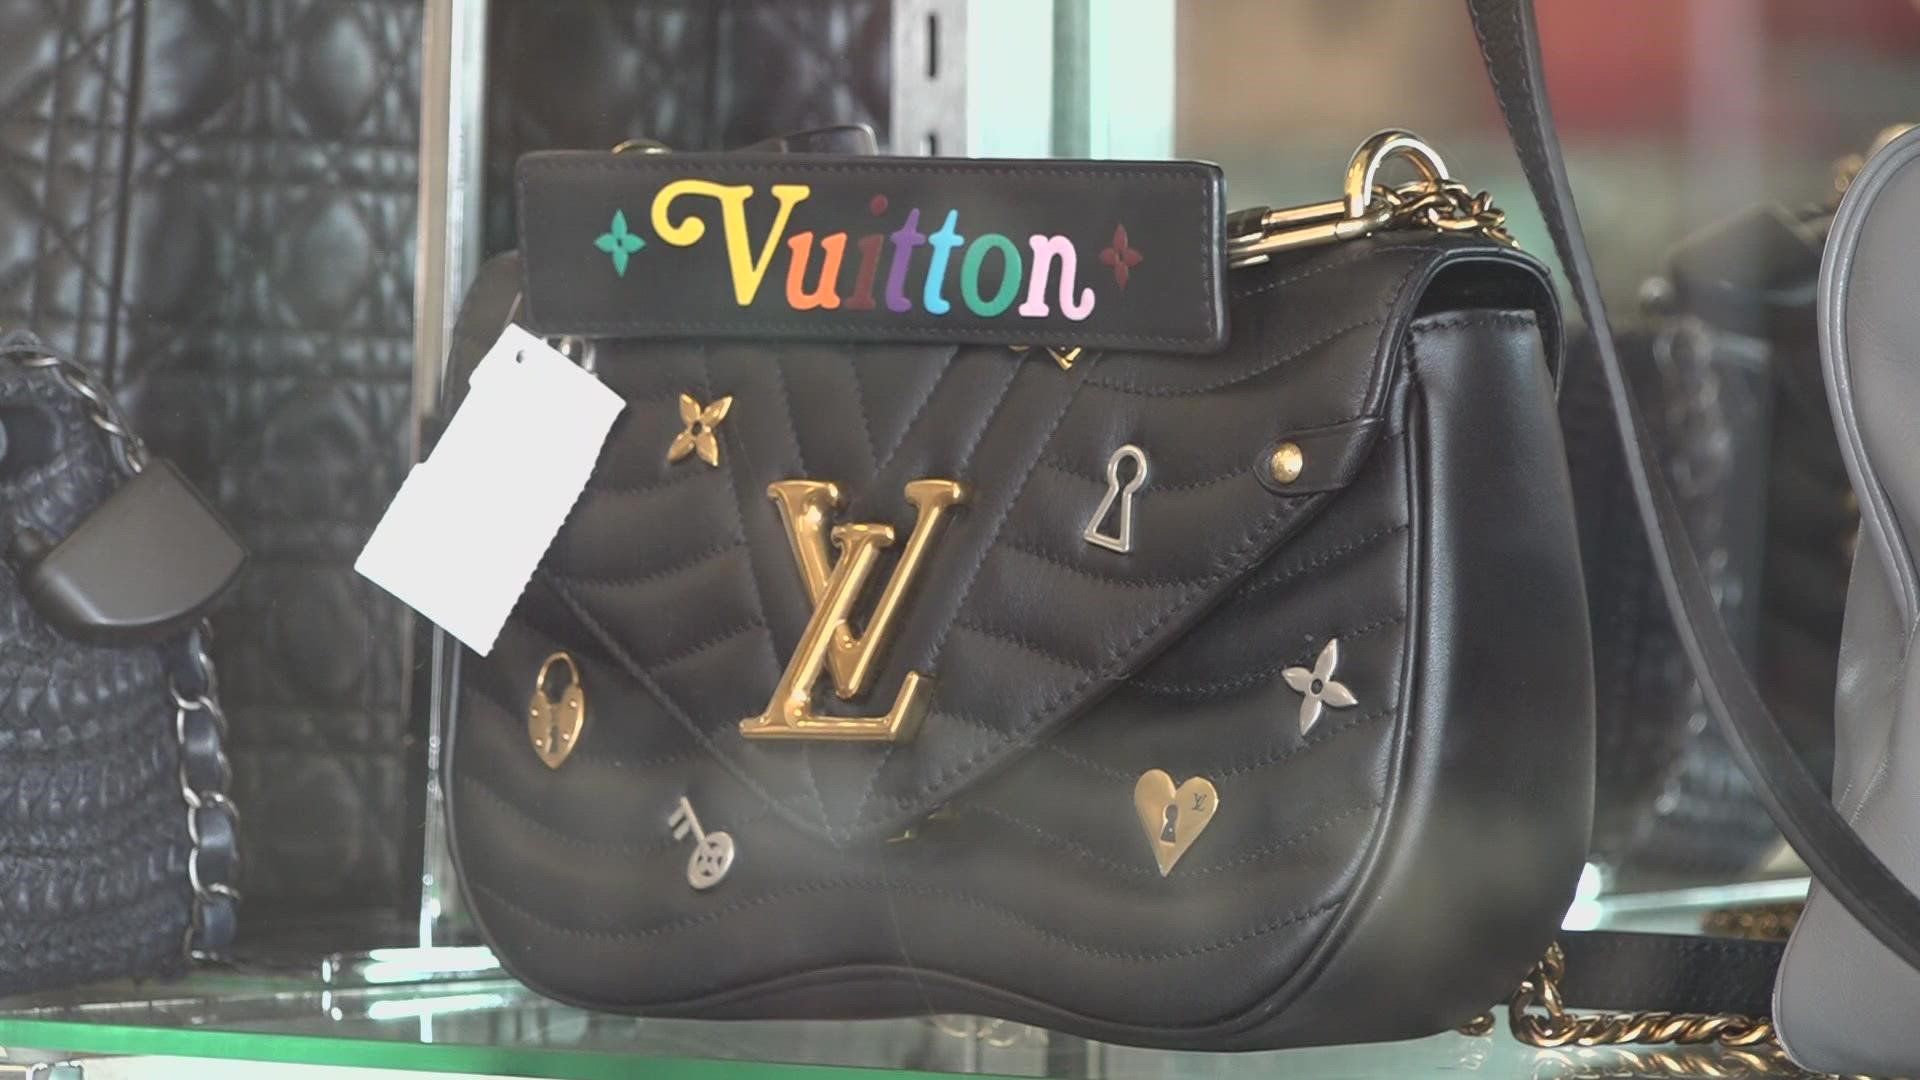 Inflation hits Louis Vuitton, price tags going up - P.M. News